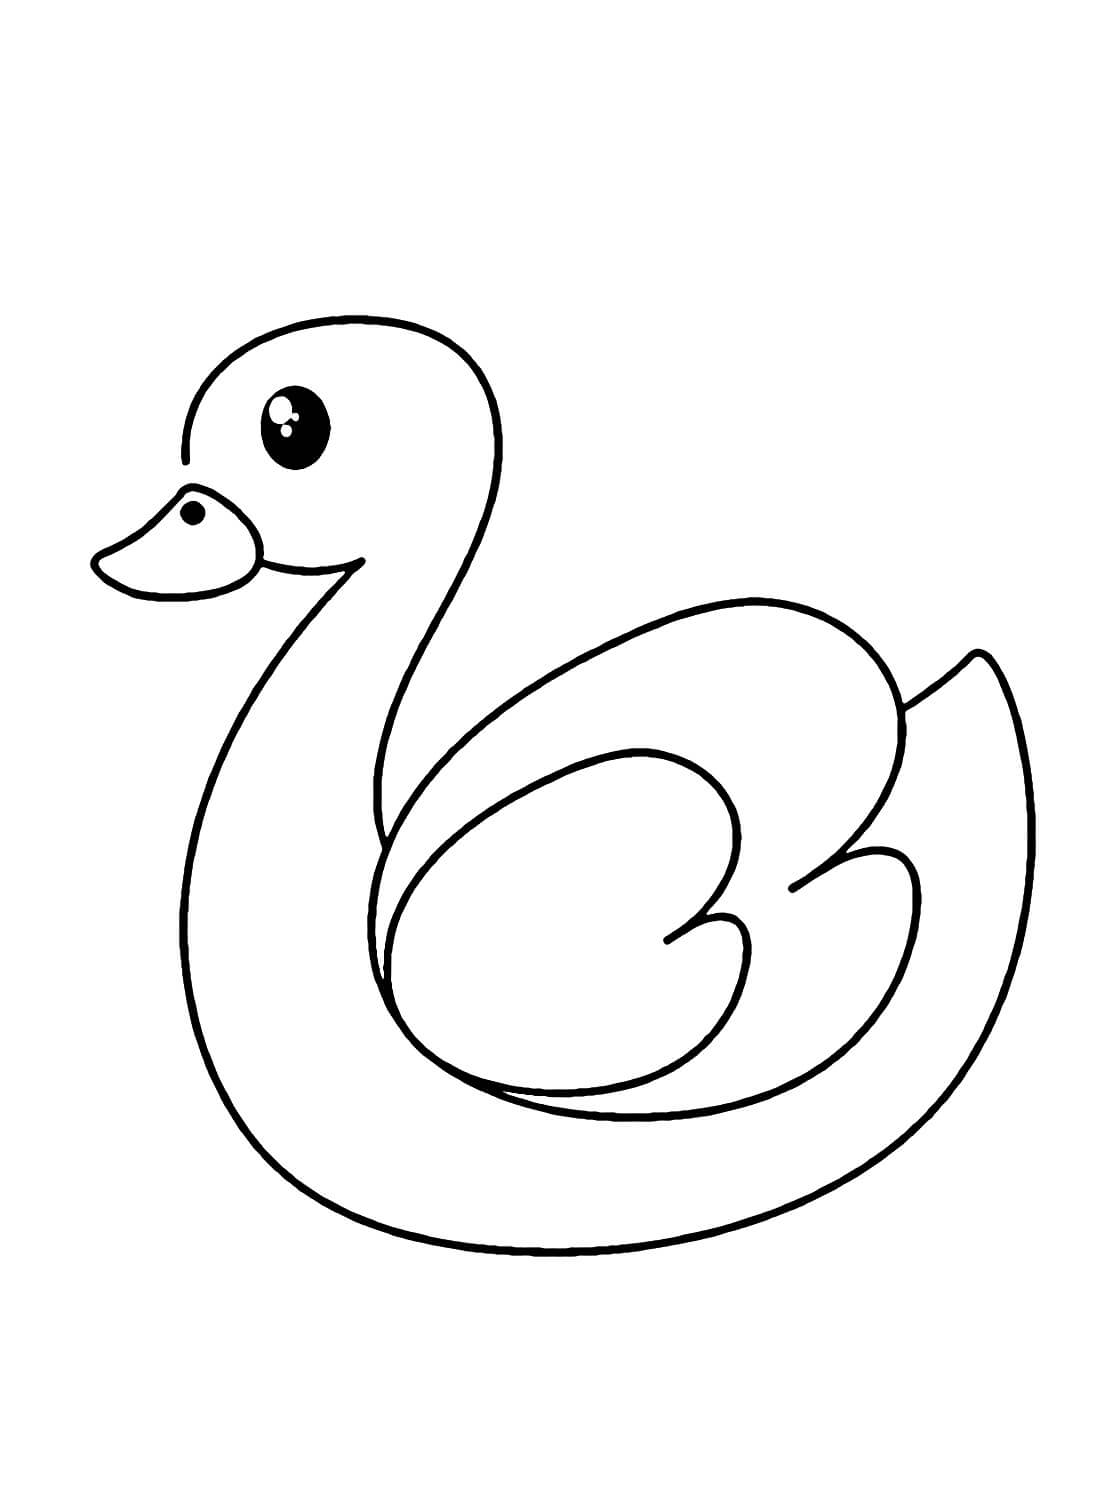 White Swan coloring page - Download, Print or Color Online for Free